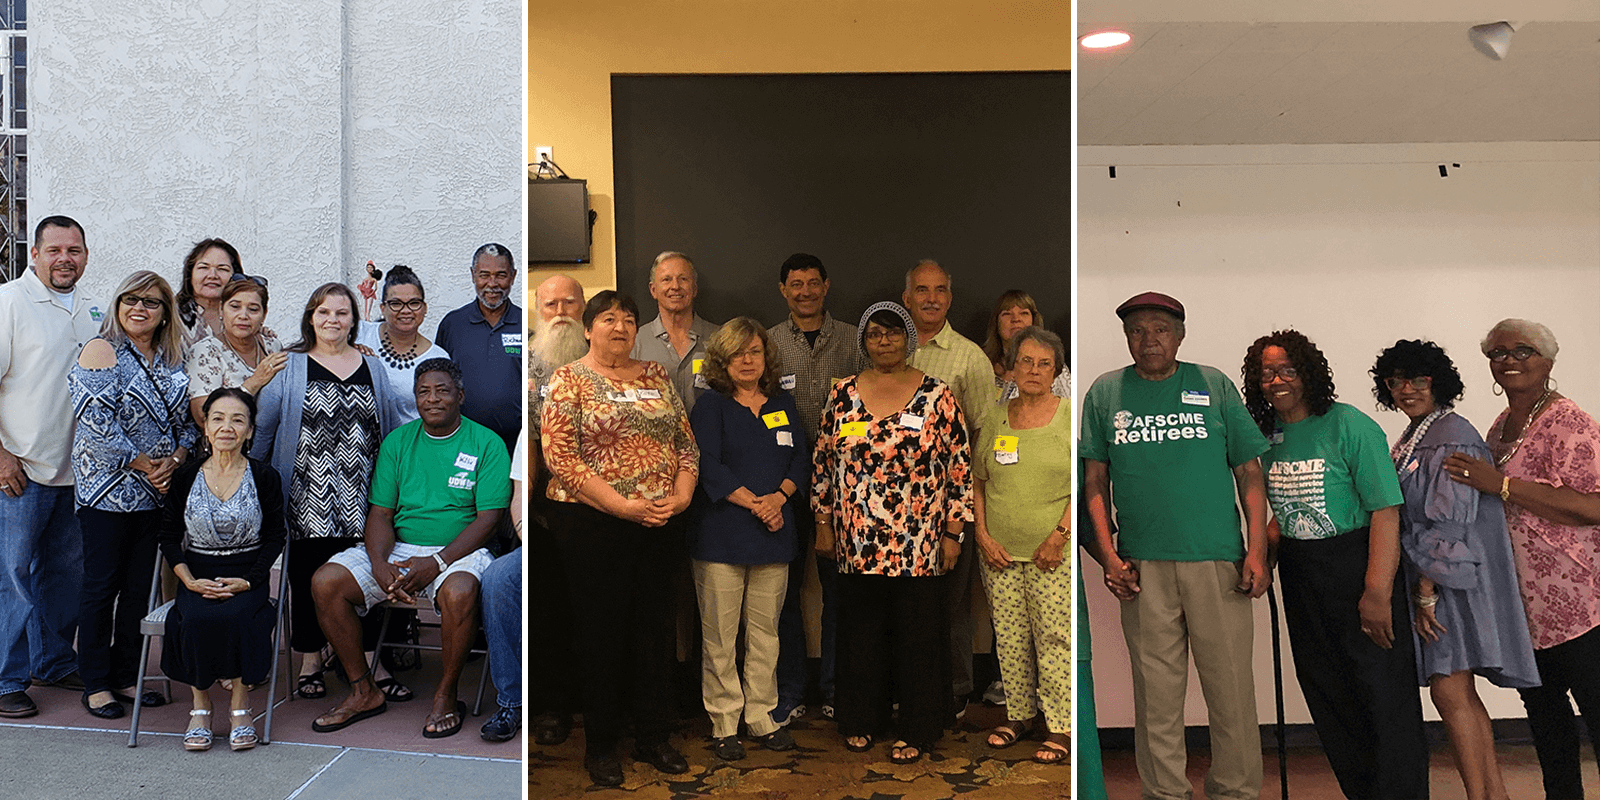 A Busy Summer for AFSCME Retirees